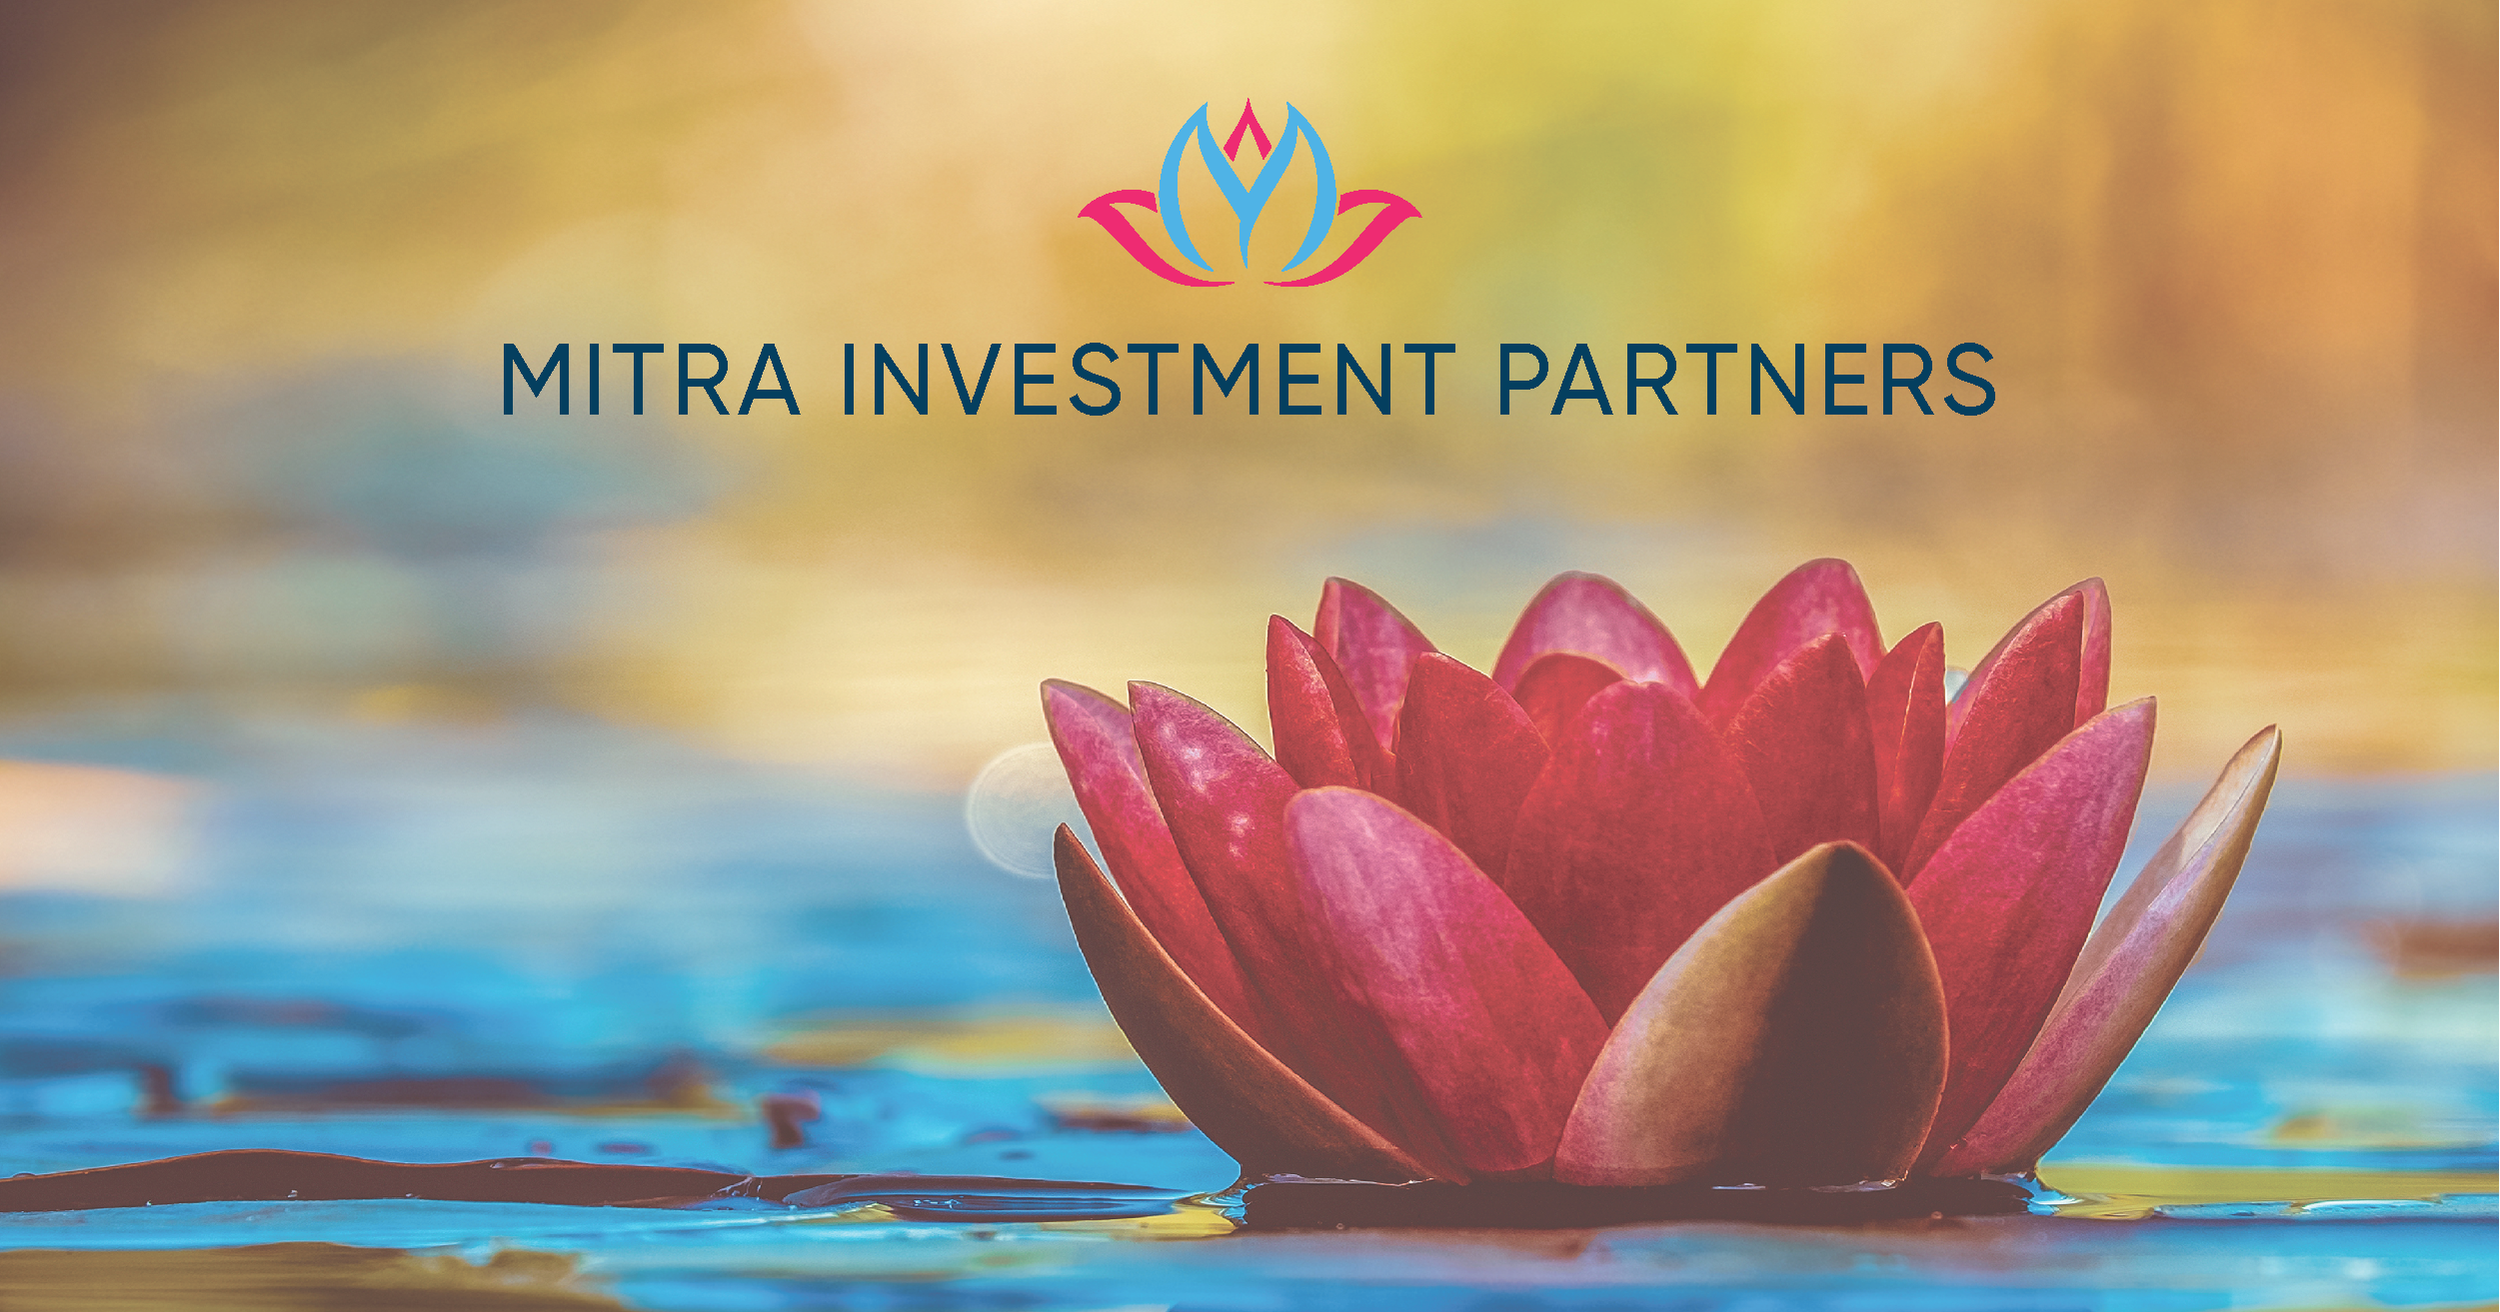 Mitra Investment Partners